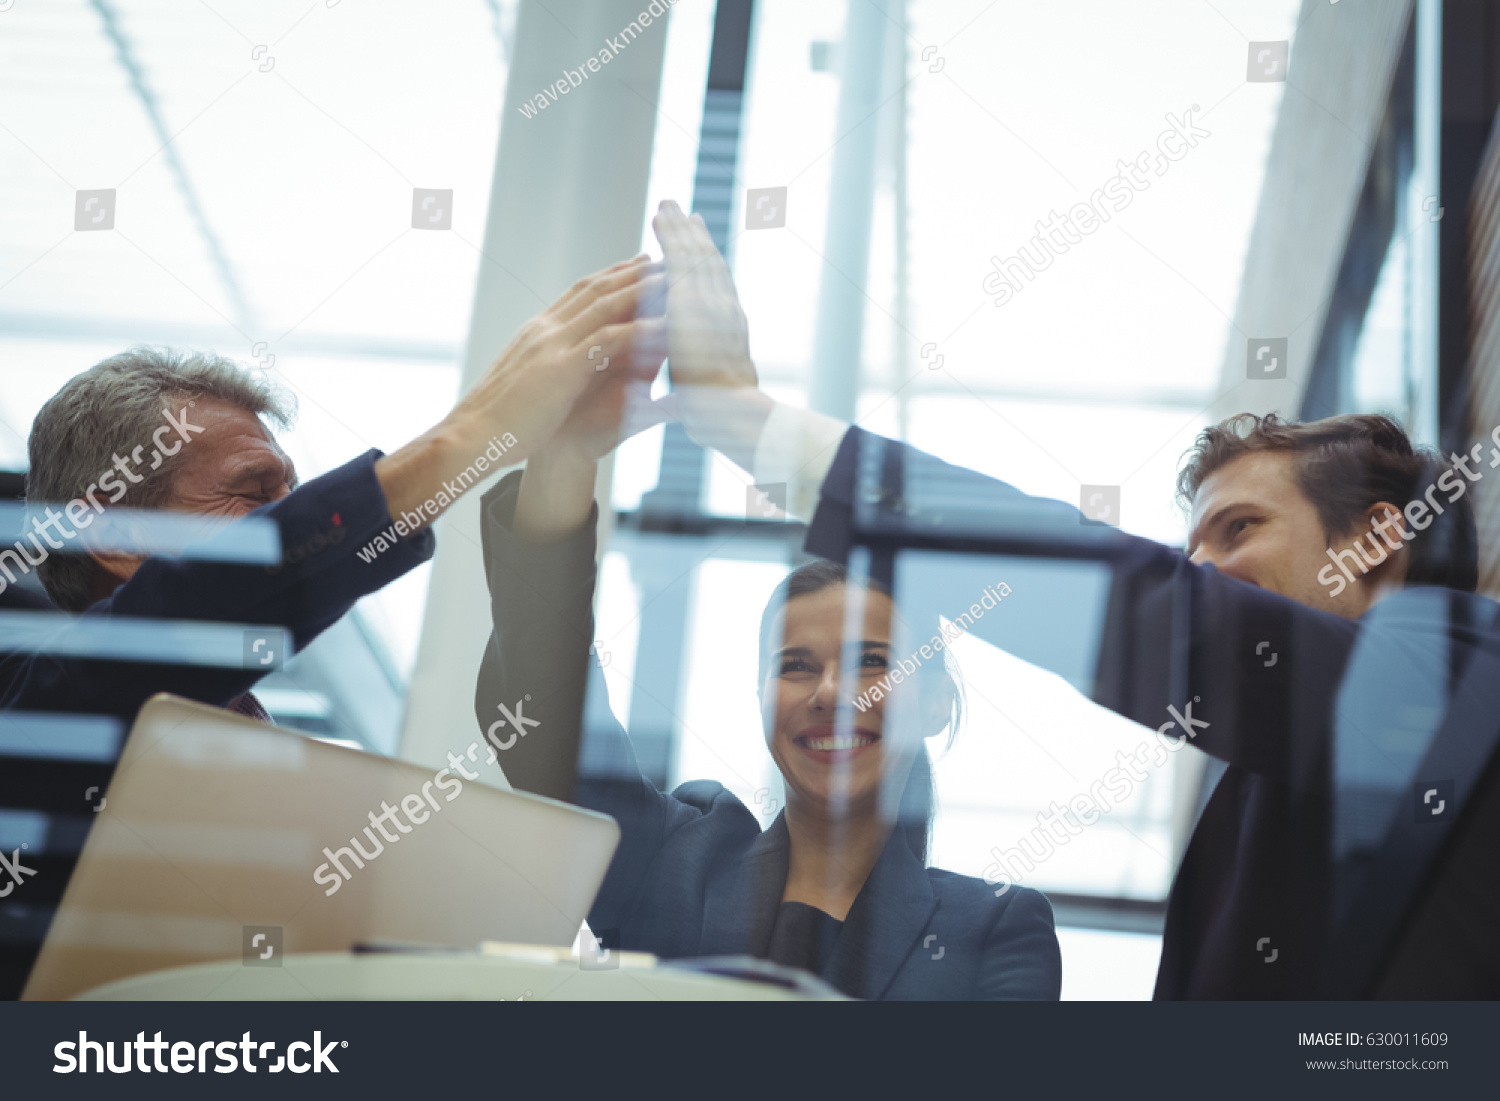 Businesspeople giving a high five to each other in office #630011609